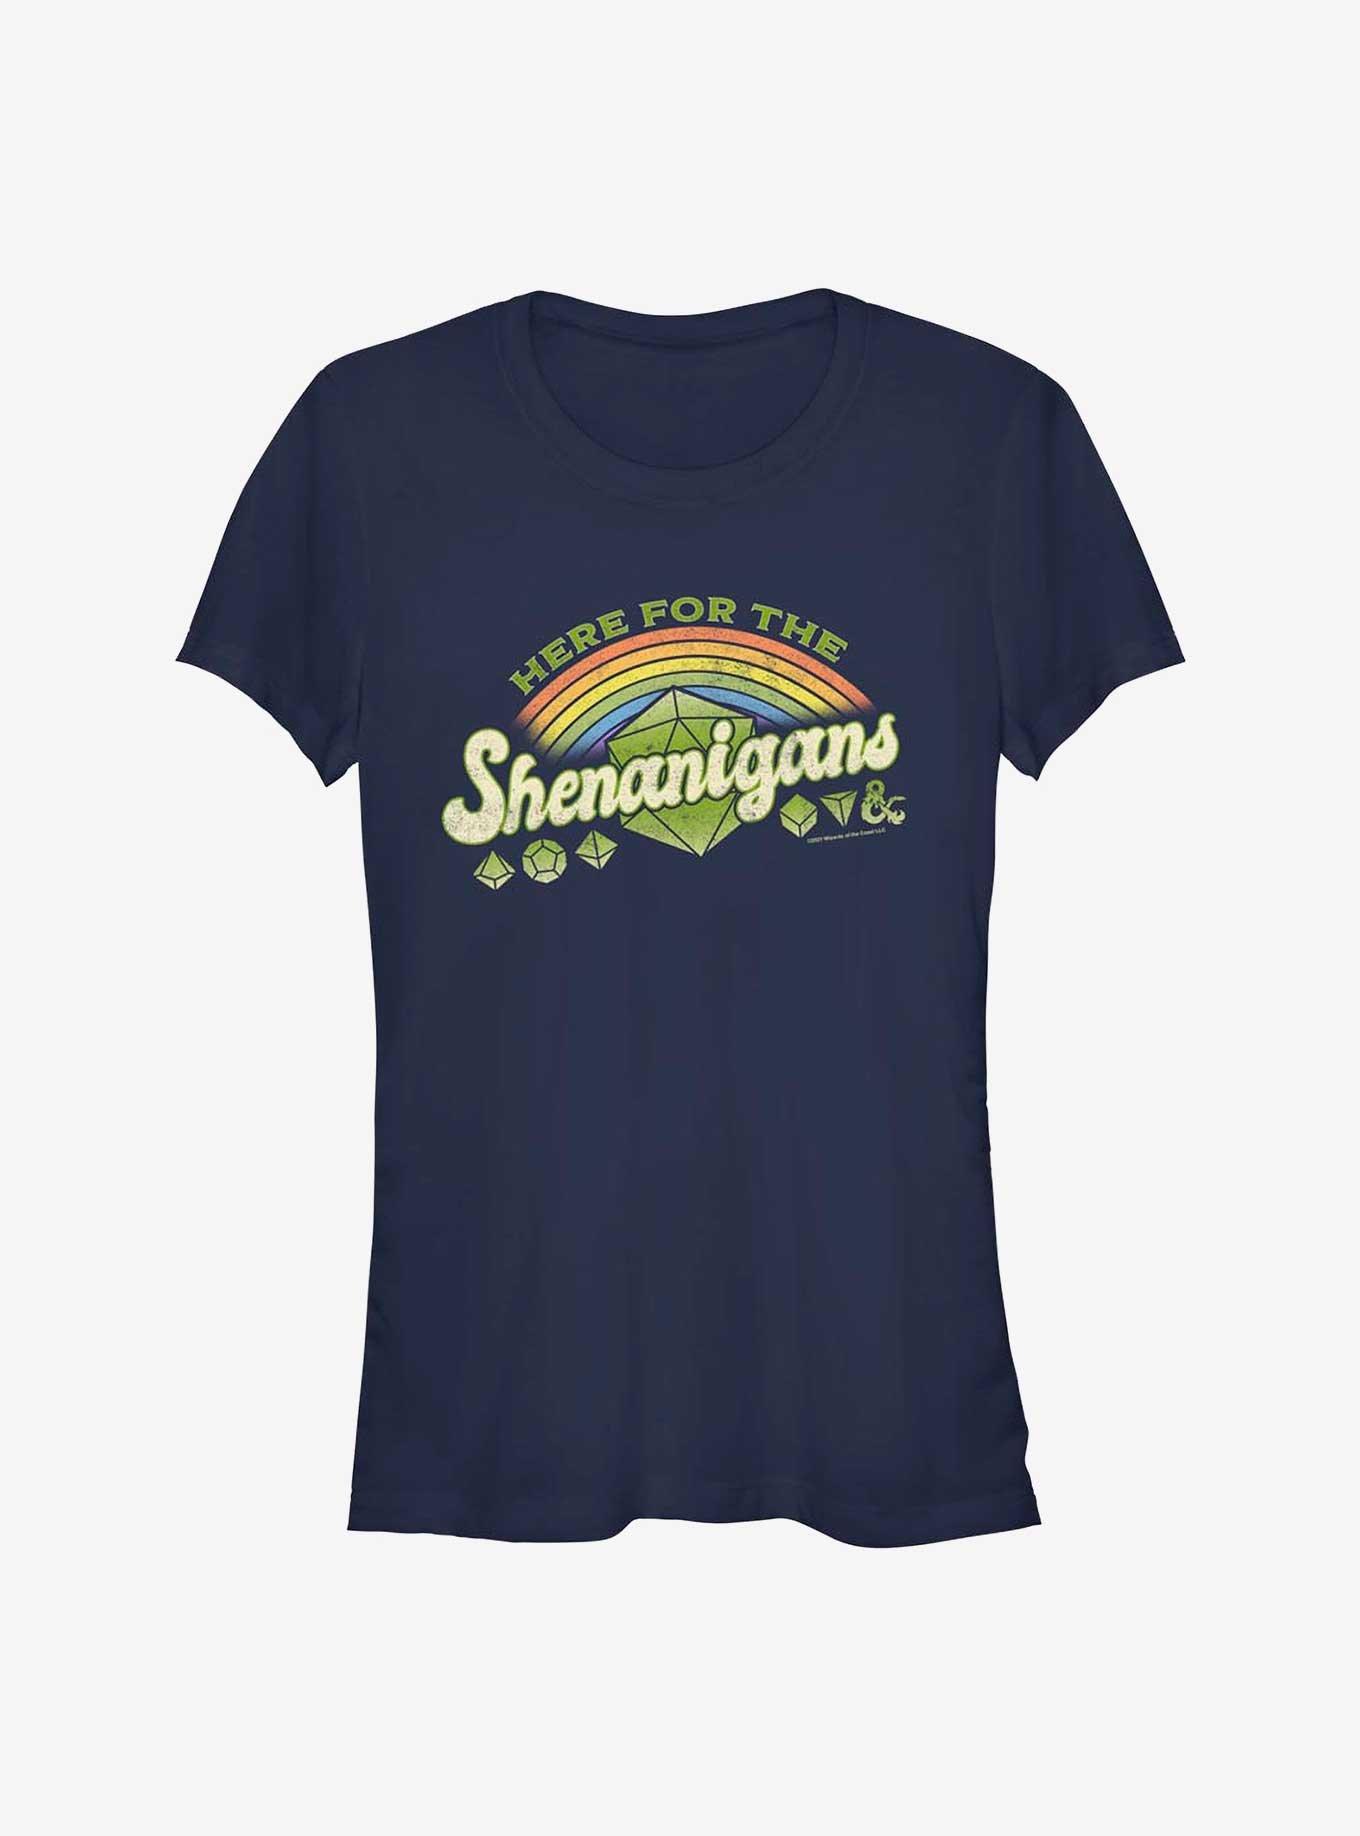 Dungeons And Dragons Here For Shenanigans Girls T-Shirt, NAVY, hi-res